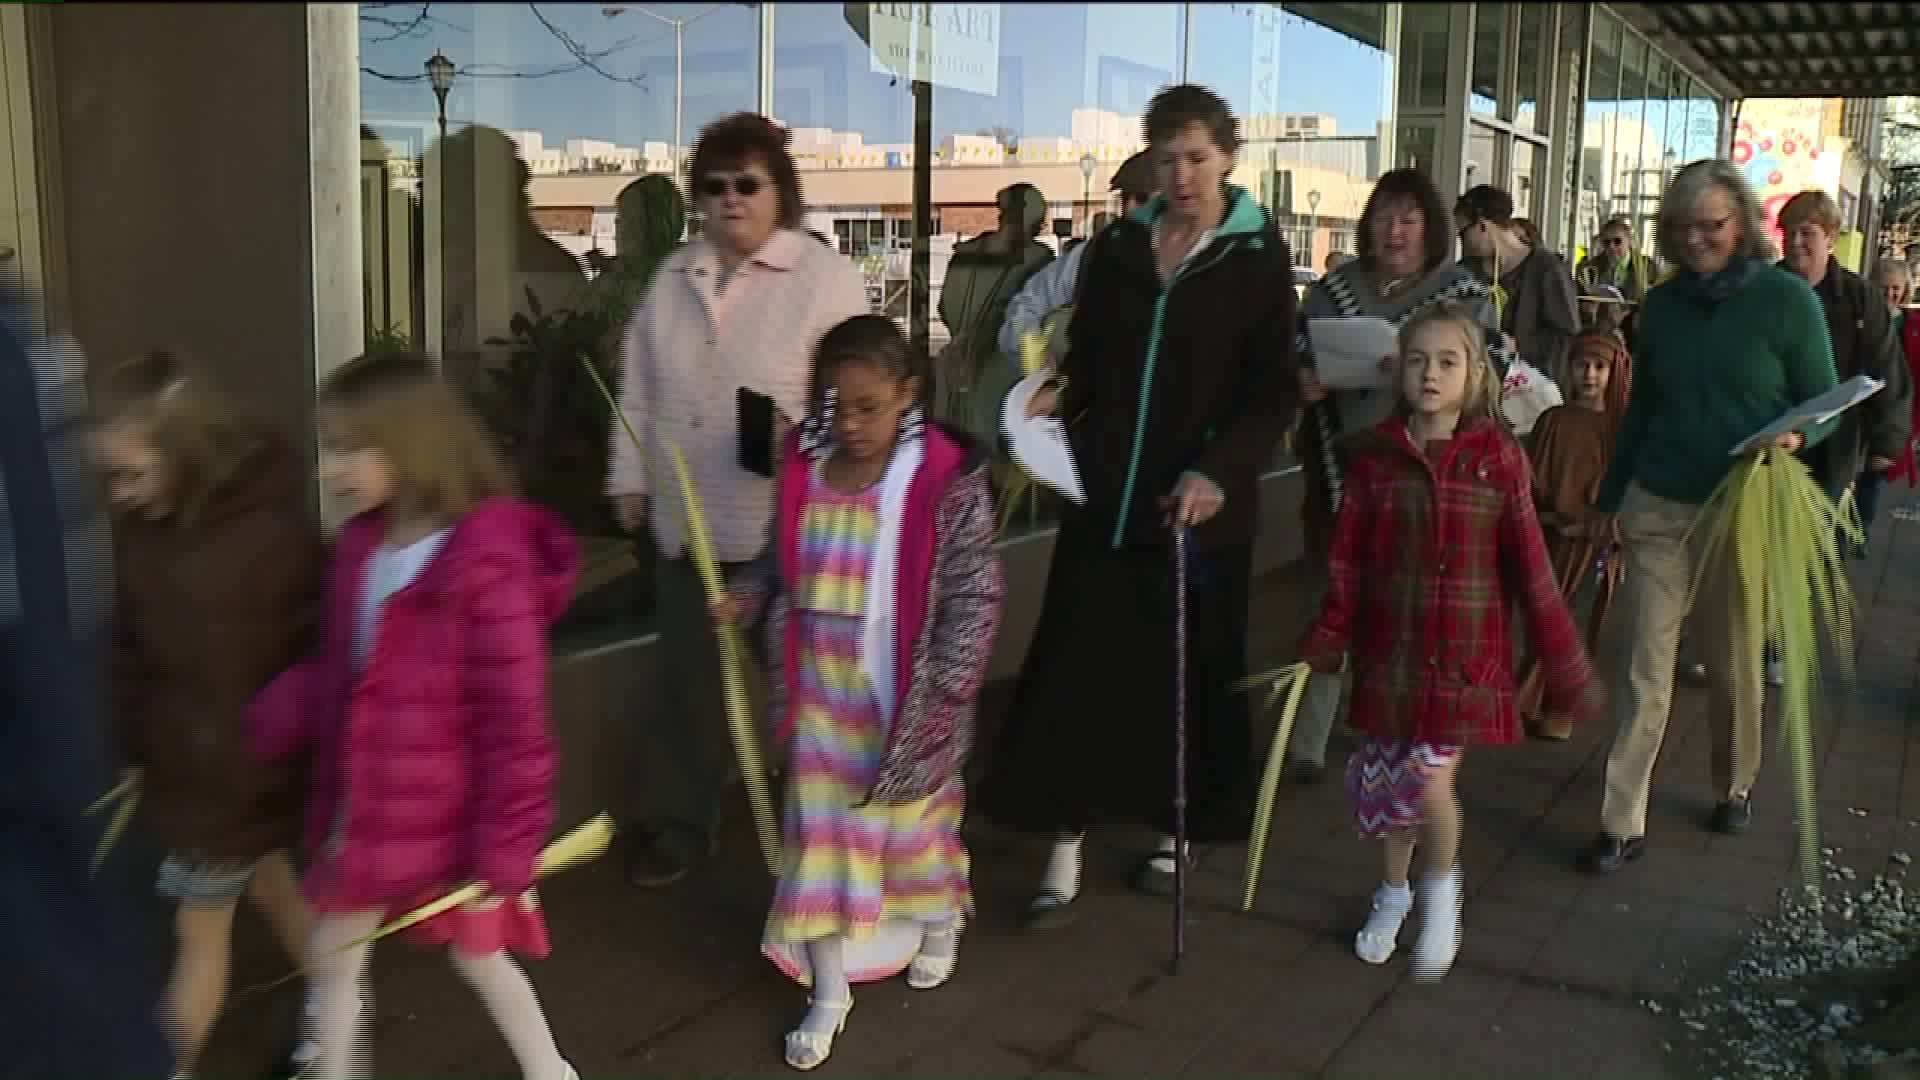 Palm Sunday Procession in Wilkes-Barre